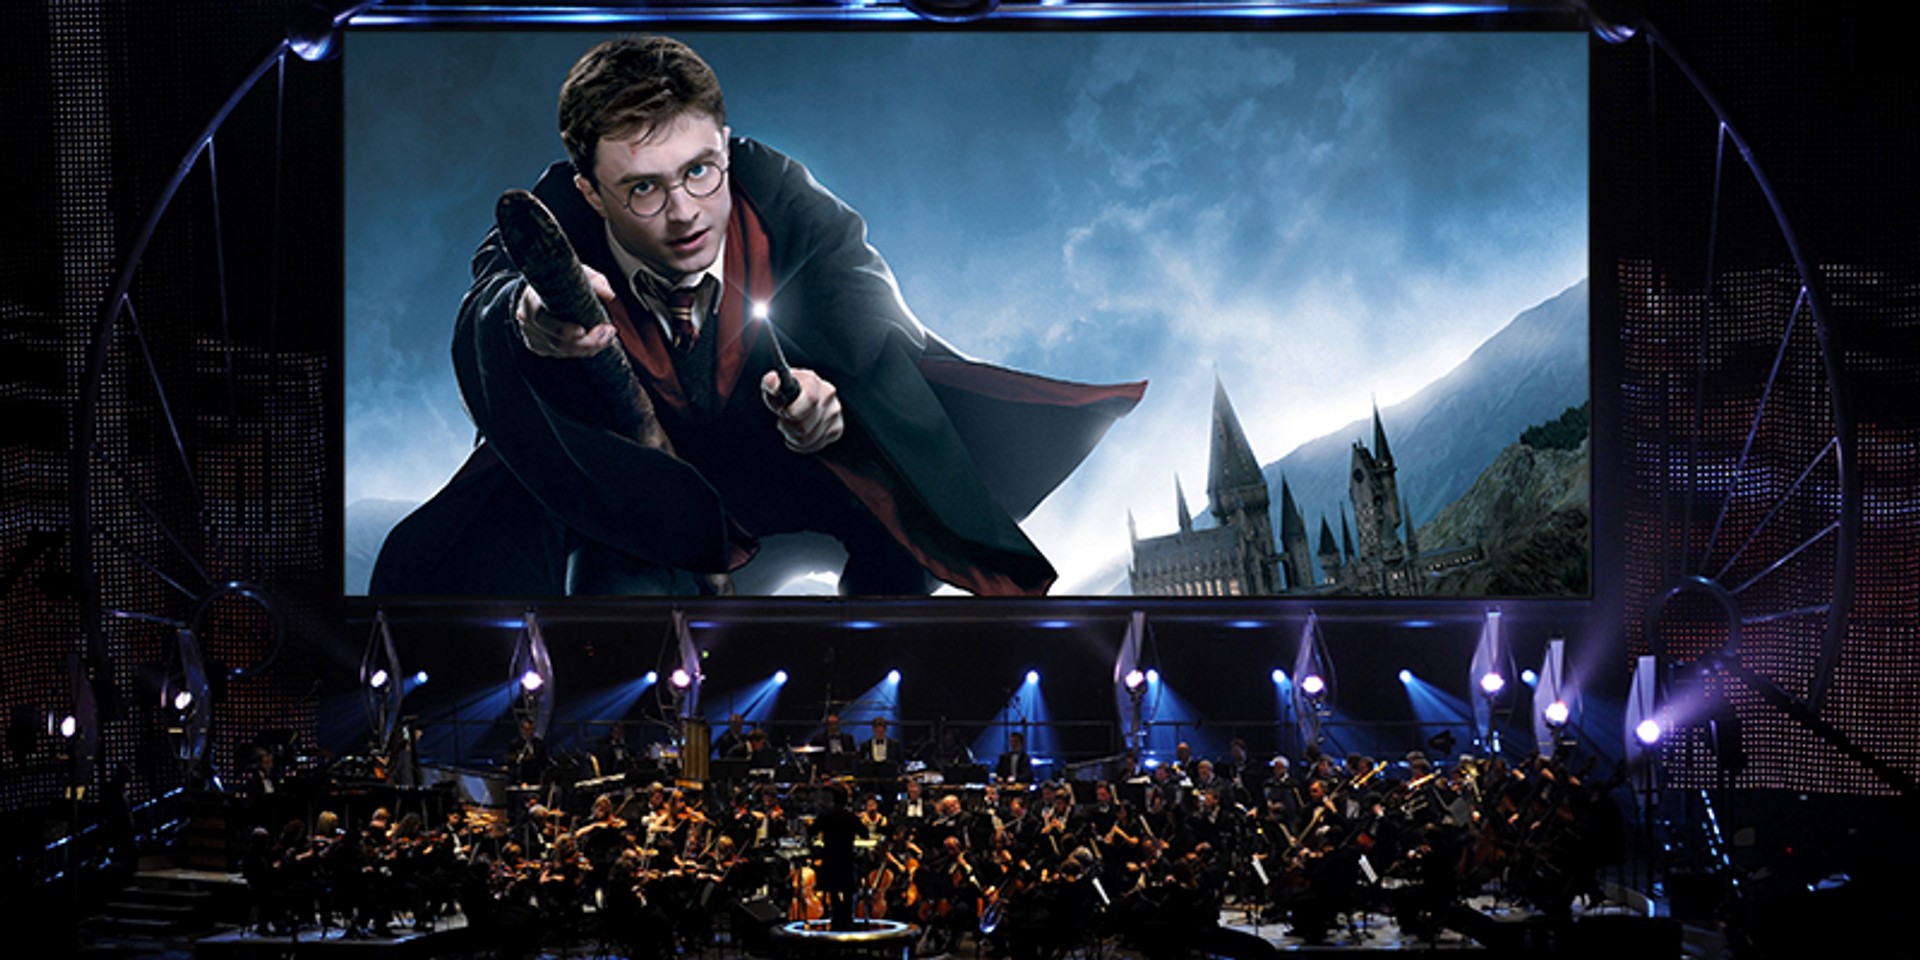 Harry Potter And The Chamber Of Secrets gets the concert treatment in Singapore